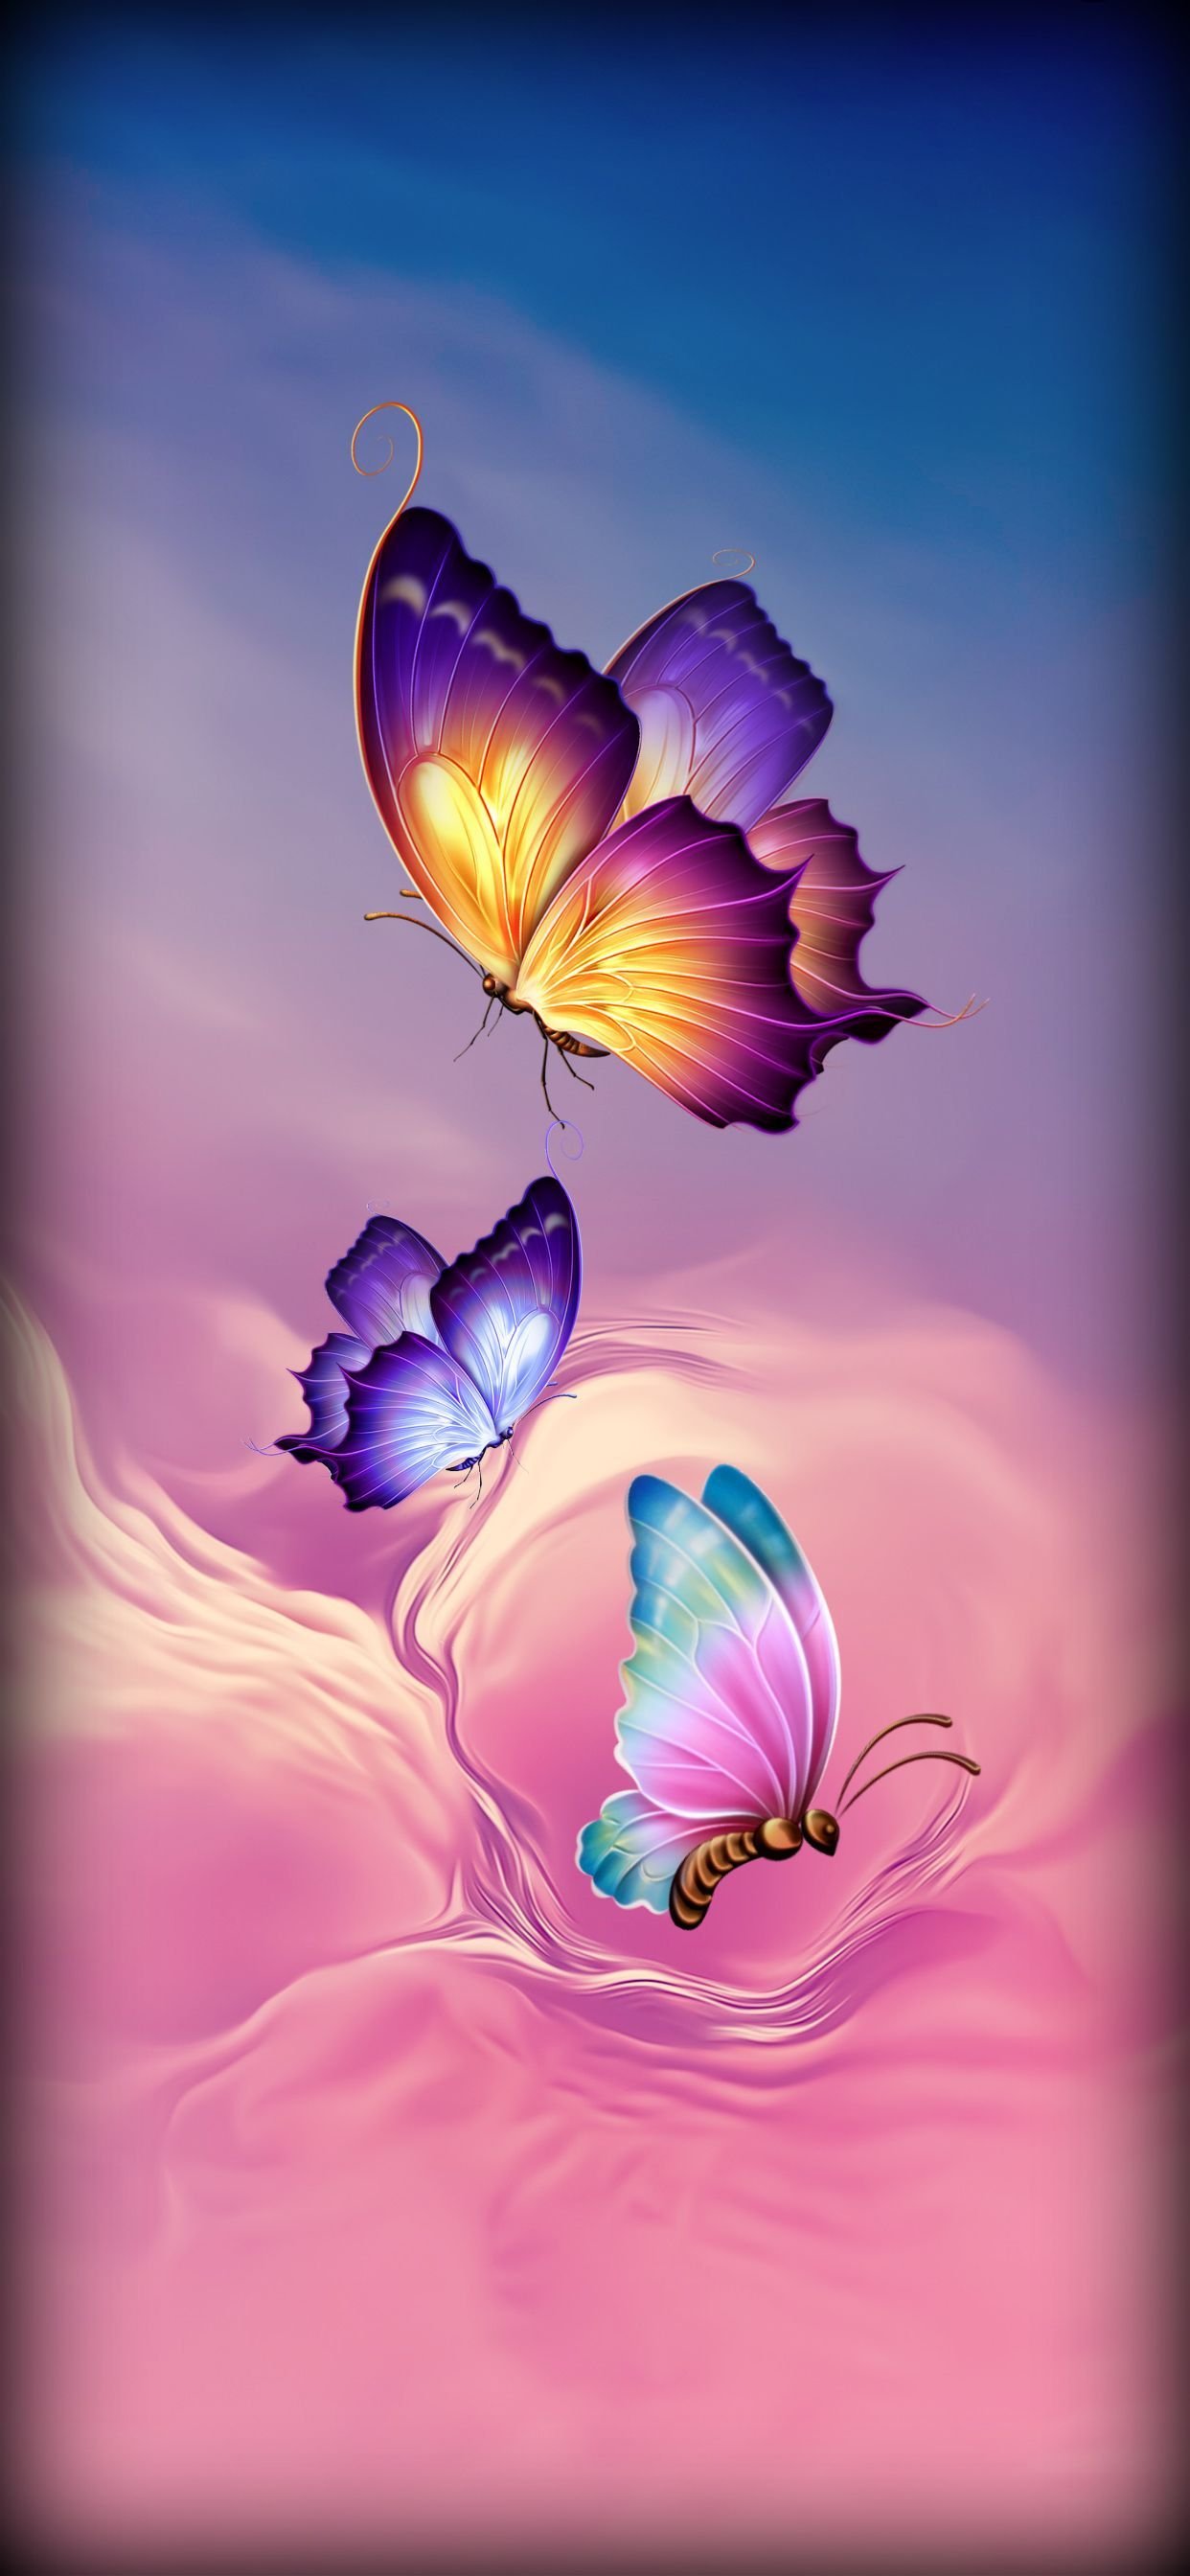 Digital Painting beautiful butterfly Poster Wallpaper on fine art paper  13x19 Fine Art Print  Art  Paintings posters in India  Buy art film  design movie music nature and educational paintingswallpapers